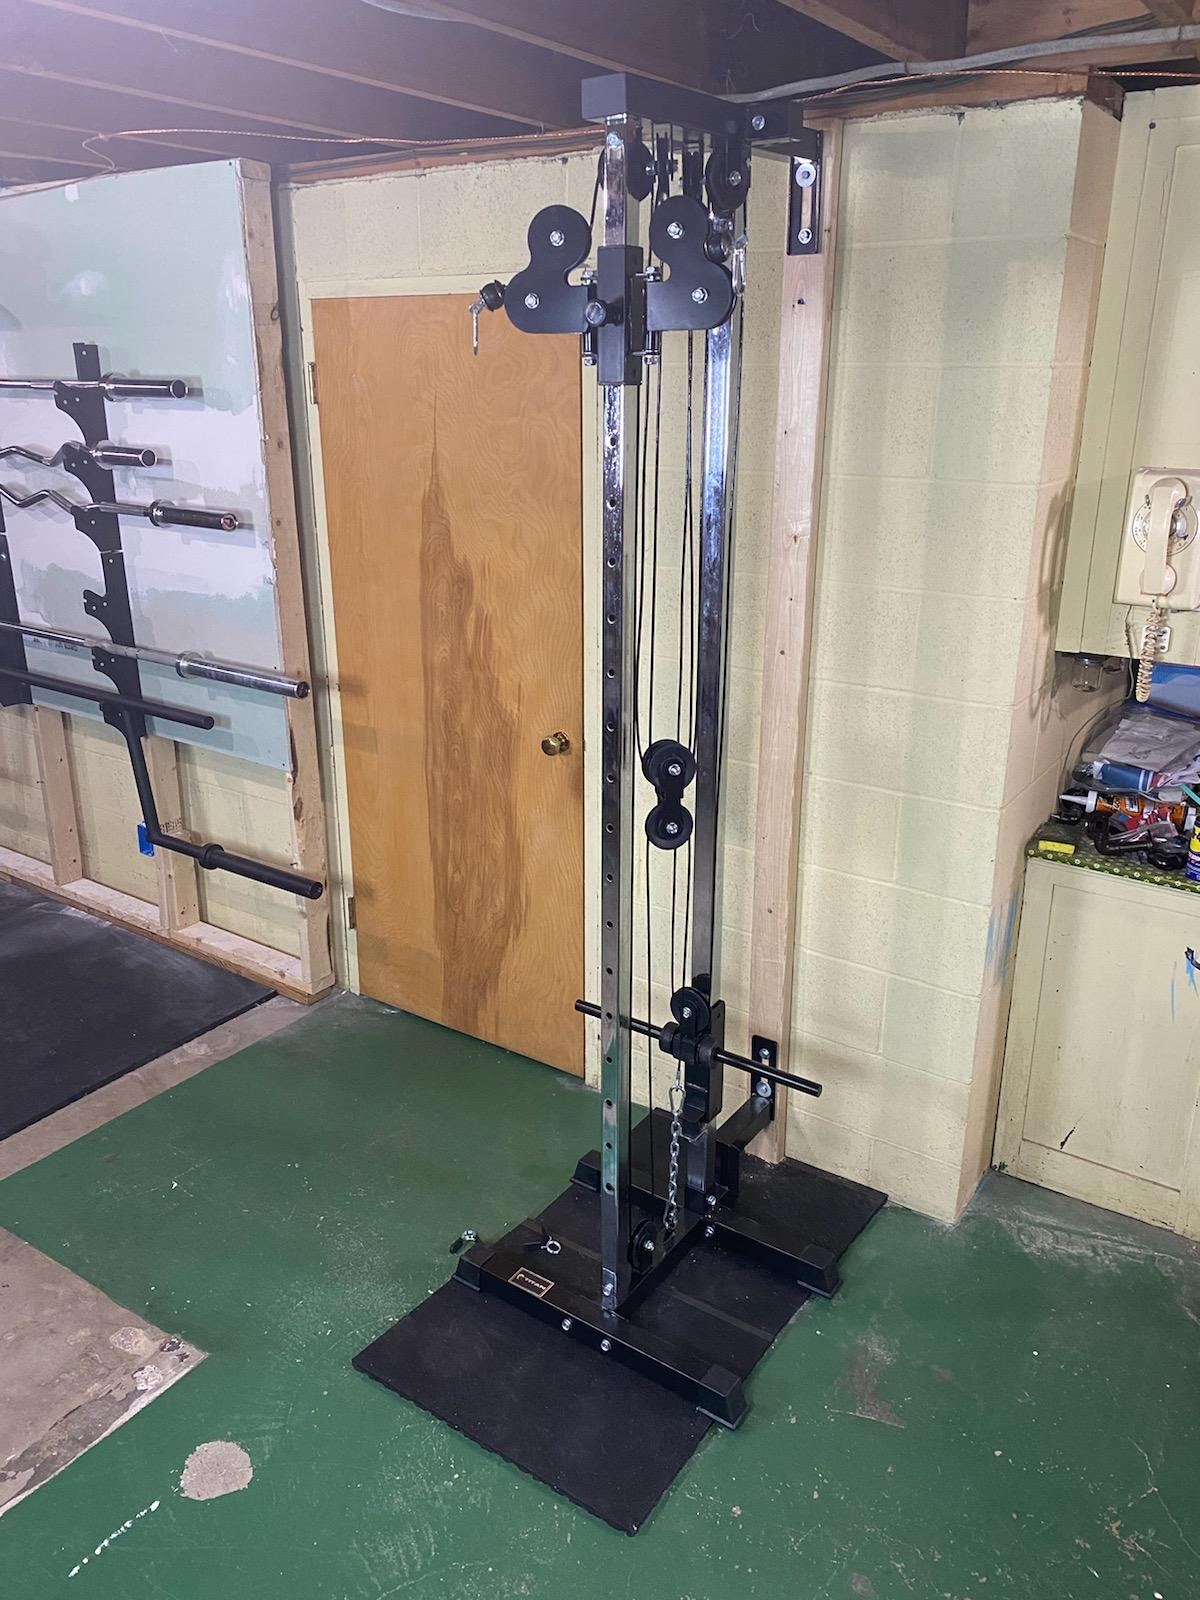 Review of the Titan Wall Mounted Pulley Tower- V3 - Garage Gym Experiment